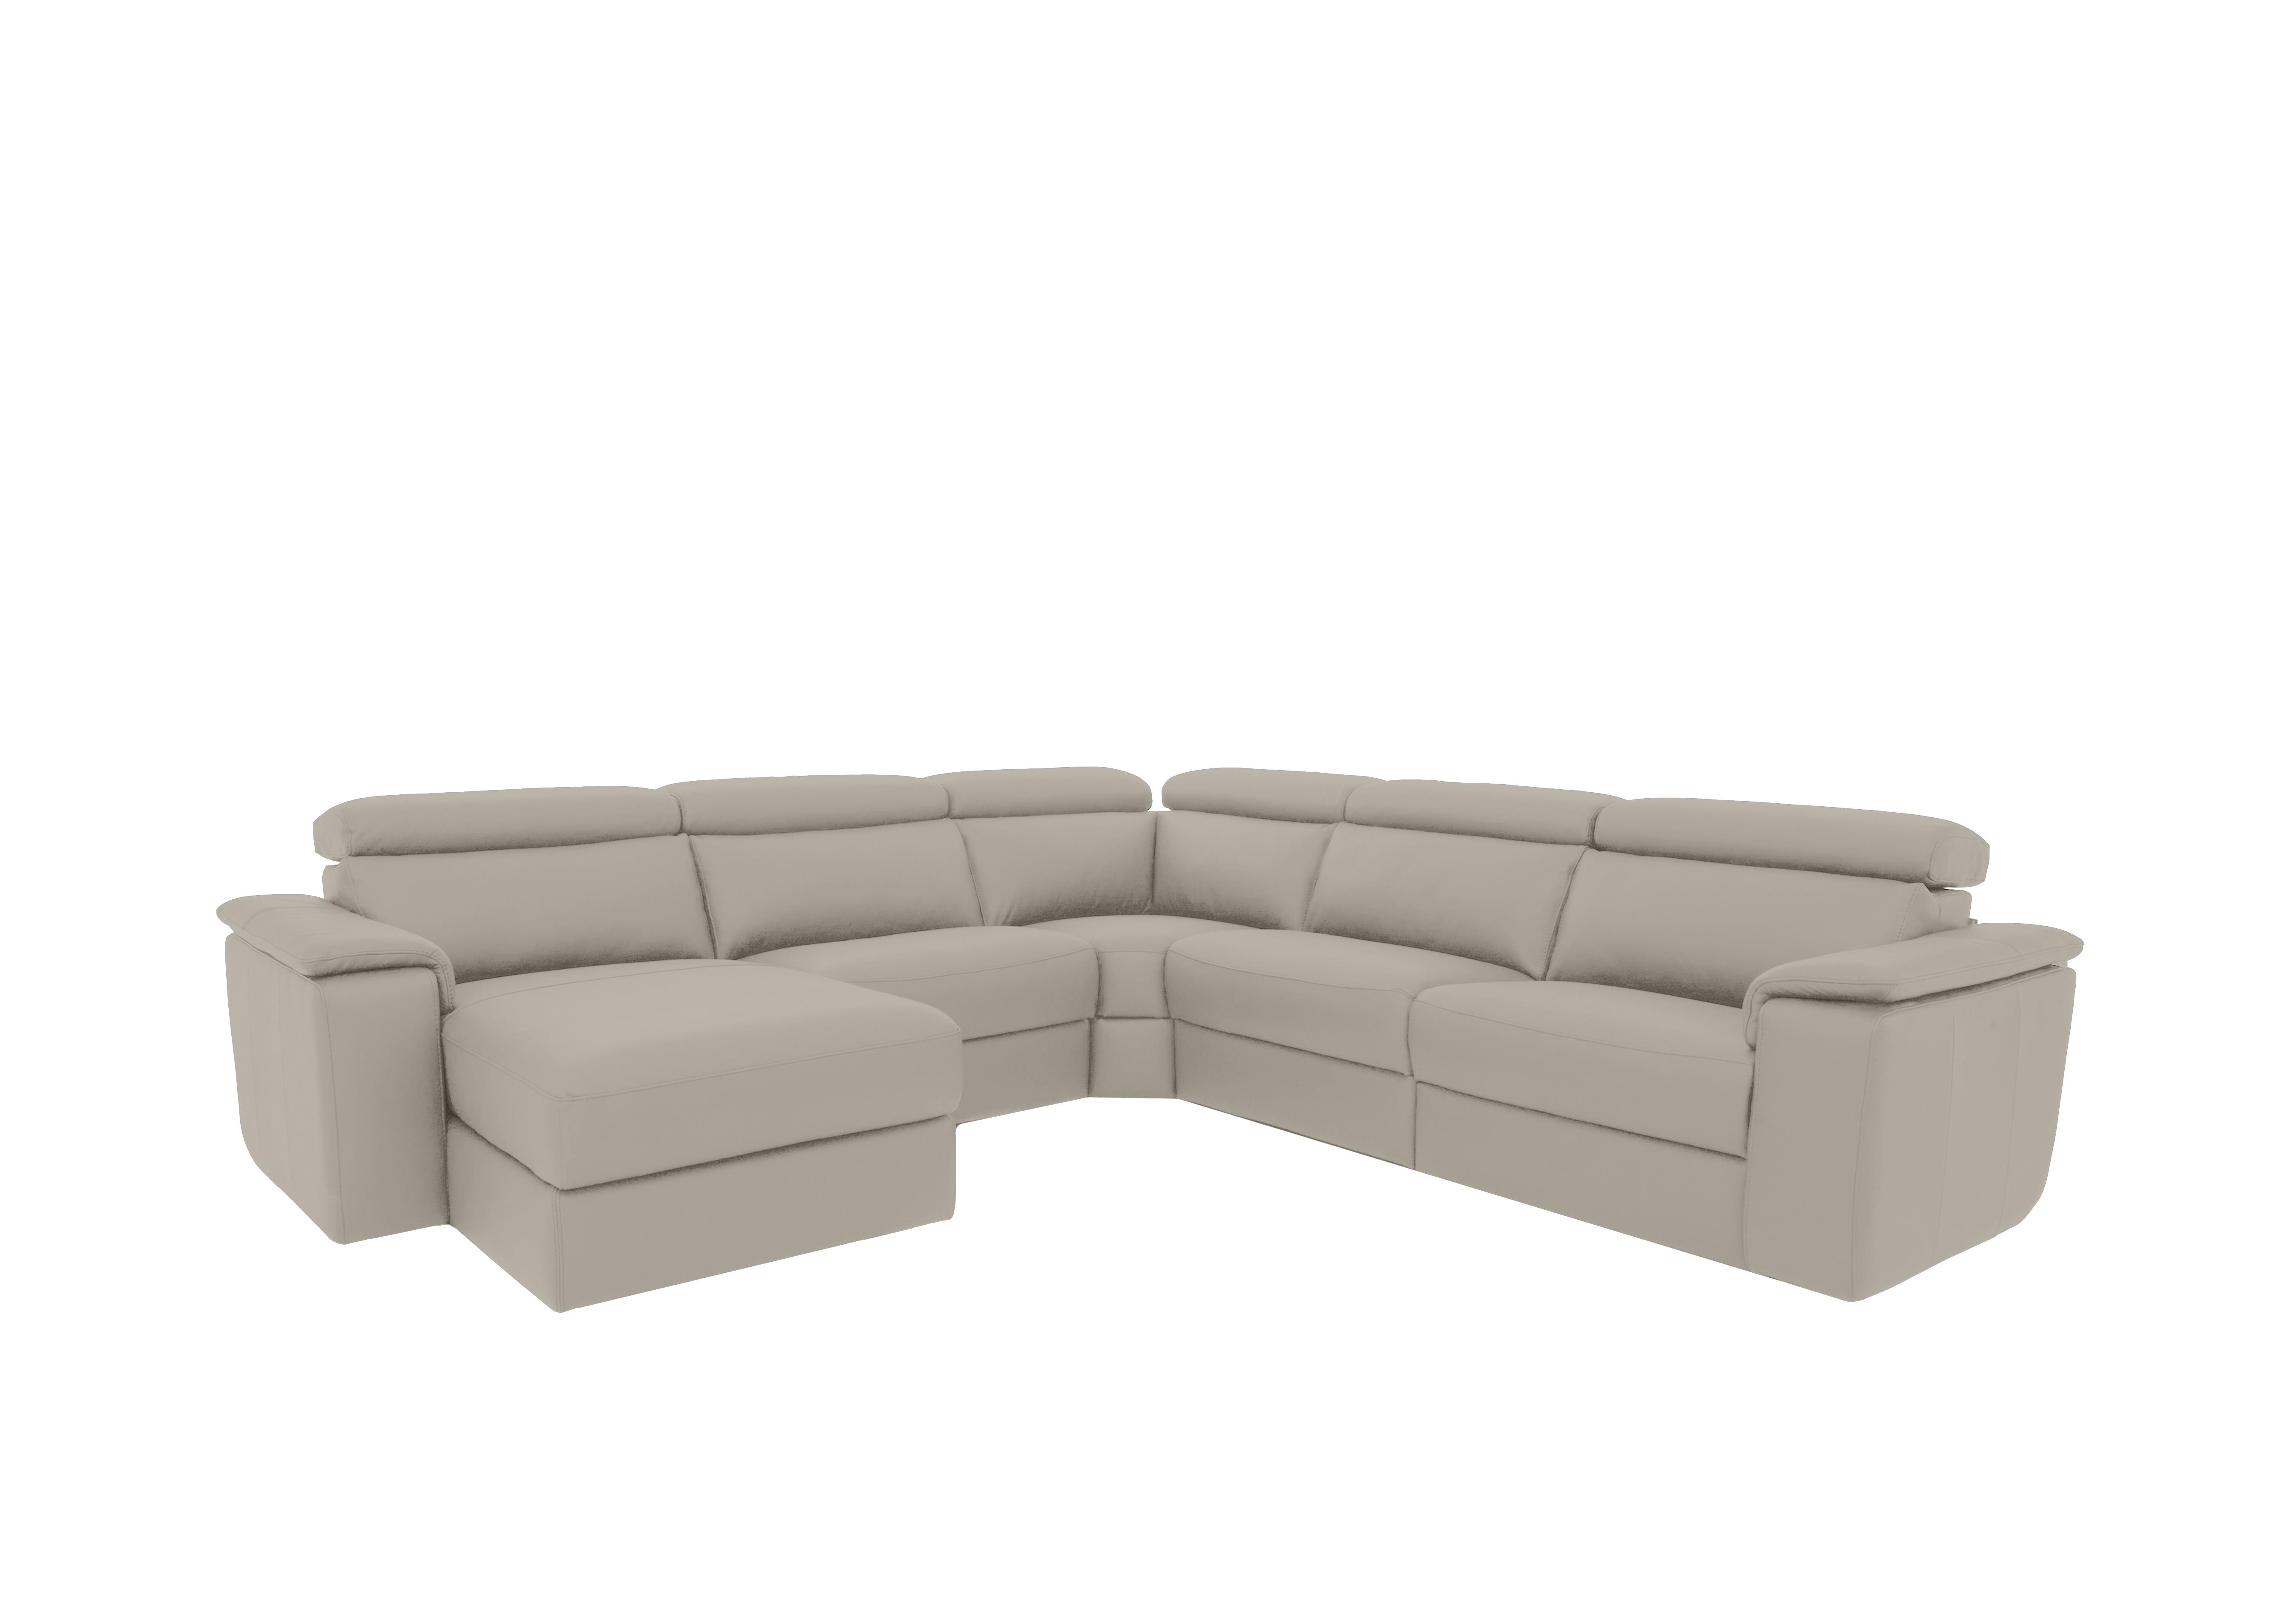 Davide Large Leather Corner Sofa with Chaise End in 328 Torello Tortora on Furniture Village